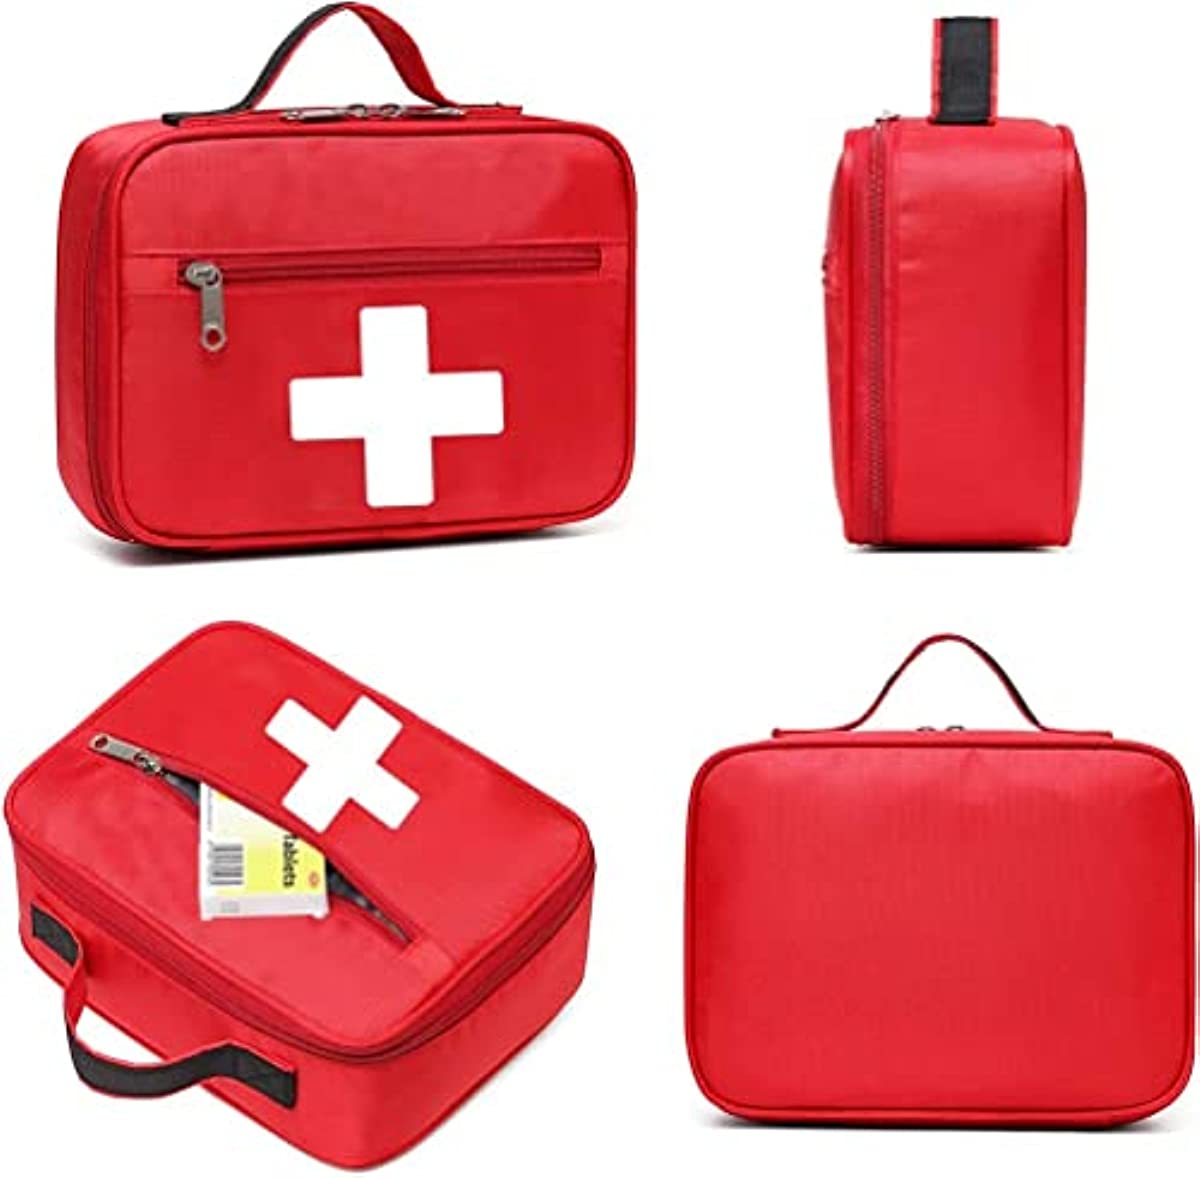 Gatycallaty First Aid Bag Empty Emergency Treatment Medical Bags Multi-Pocket for Home School Office Car Traveling Hiking Trip Daycare (LARGE -RED)